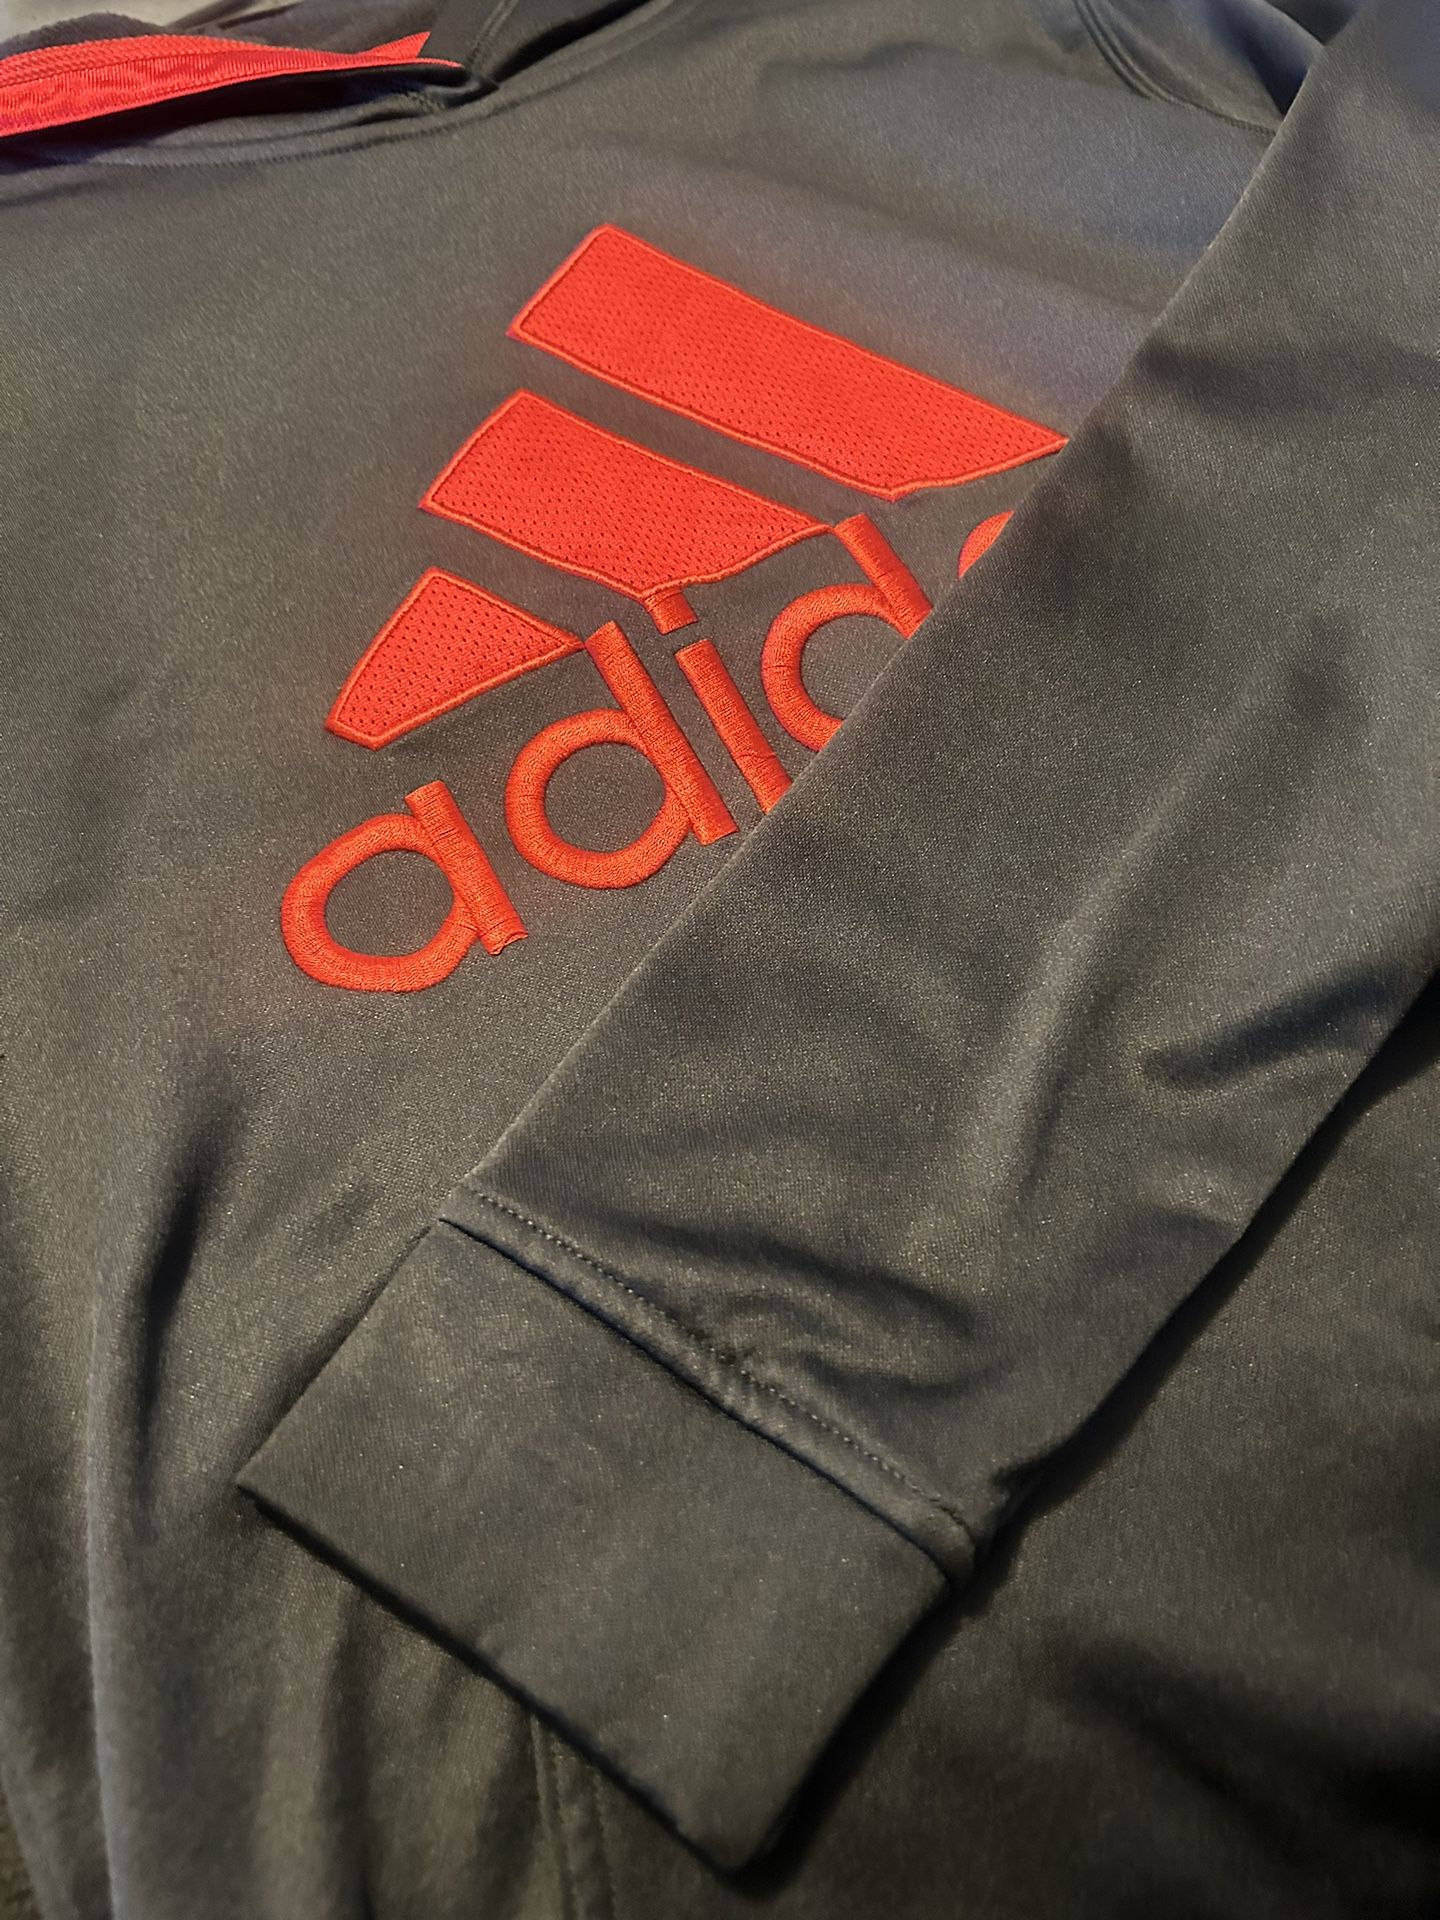 Adidas Youth Large Hoodie Sweater 